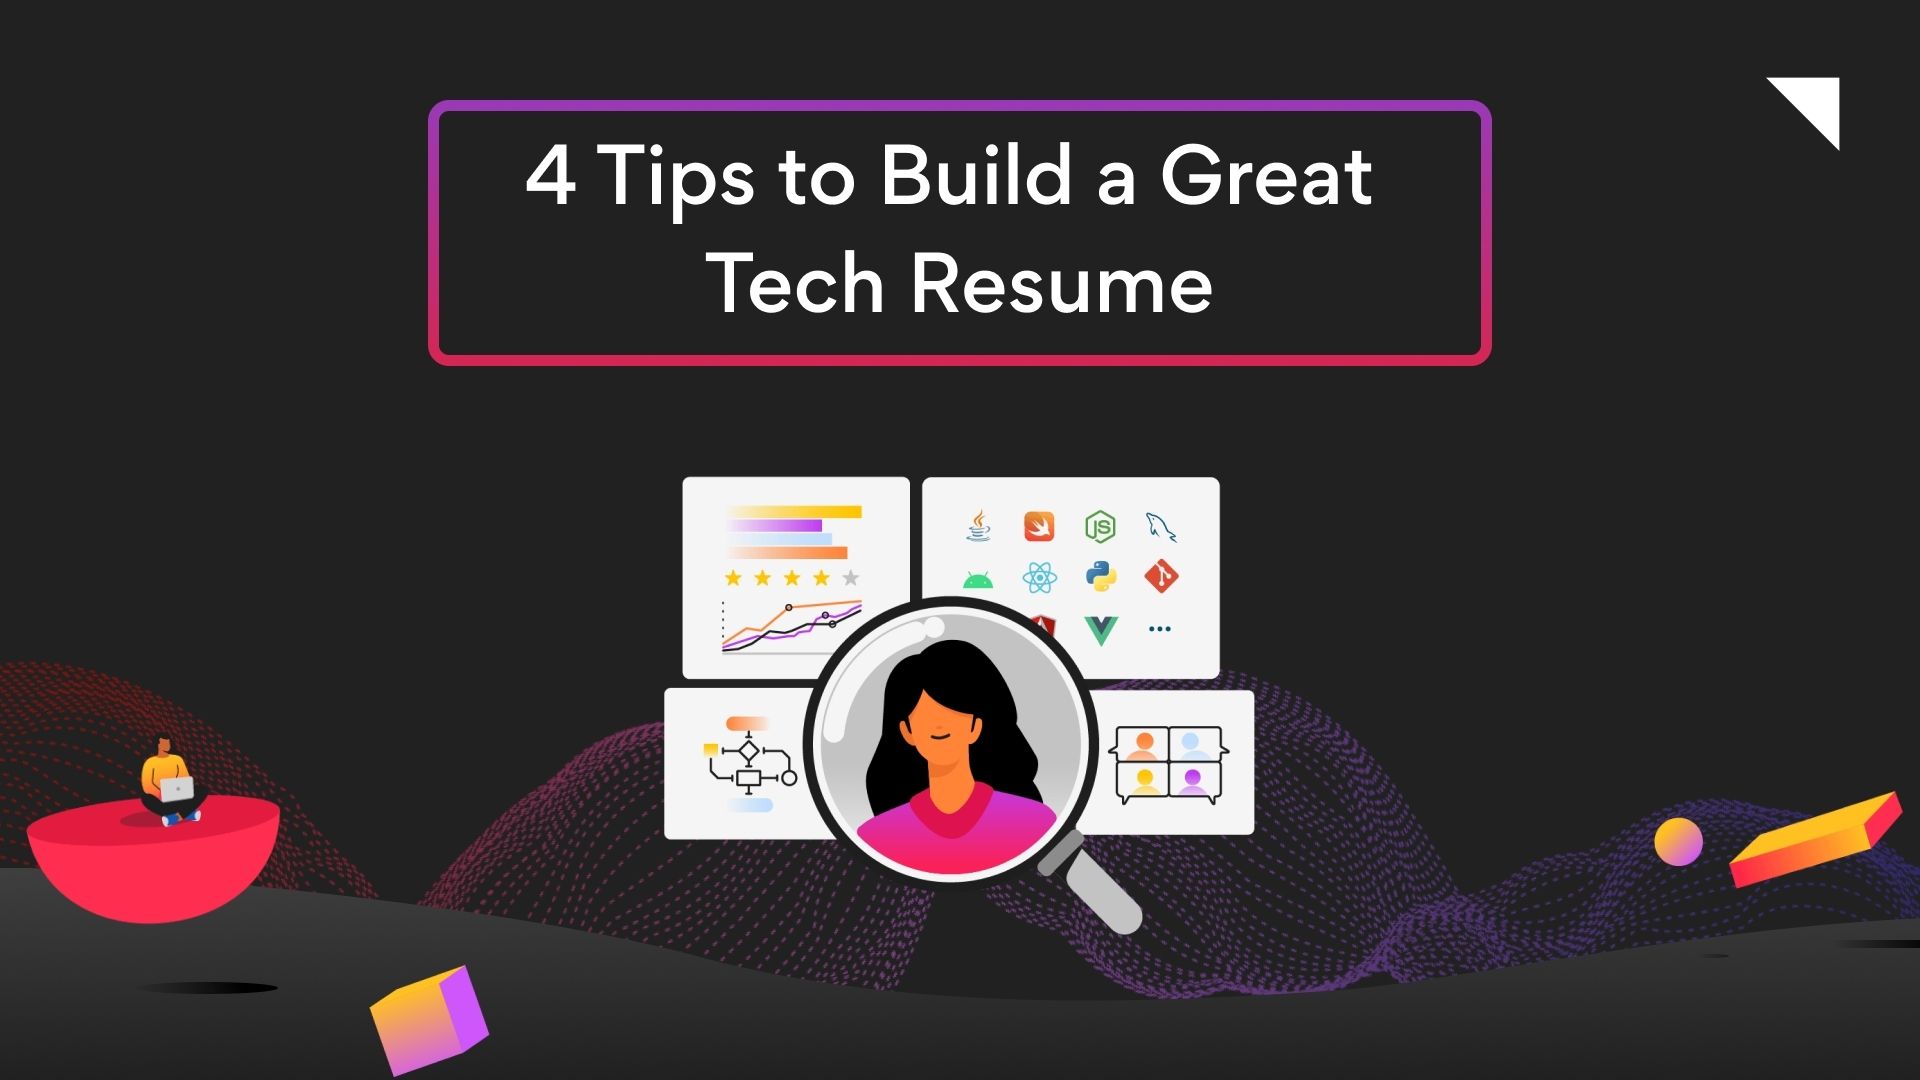 Tips to build a great tech resume (1)